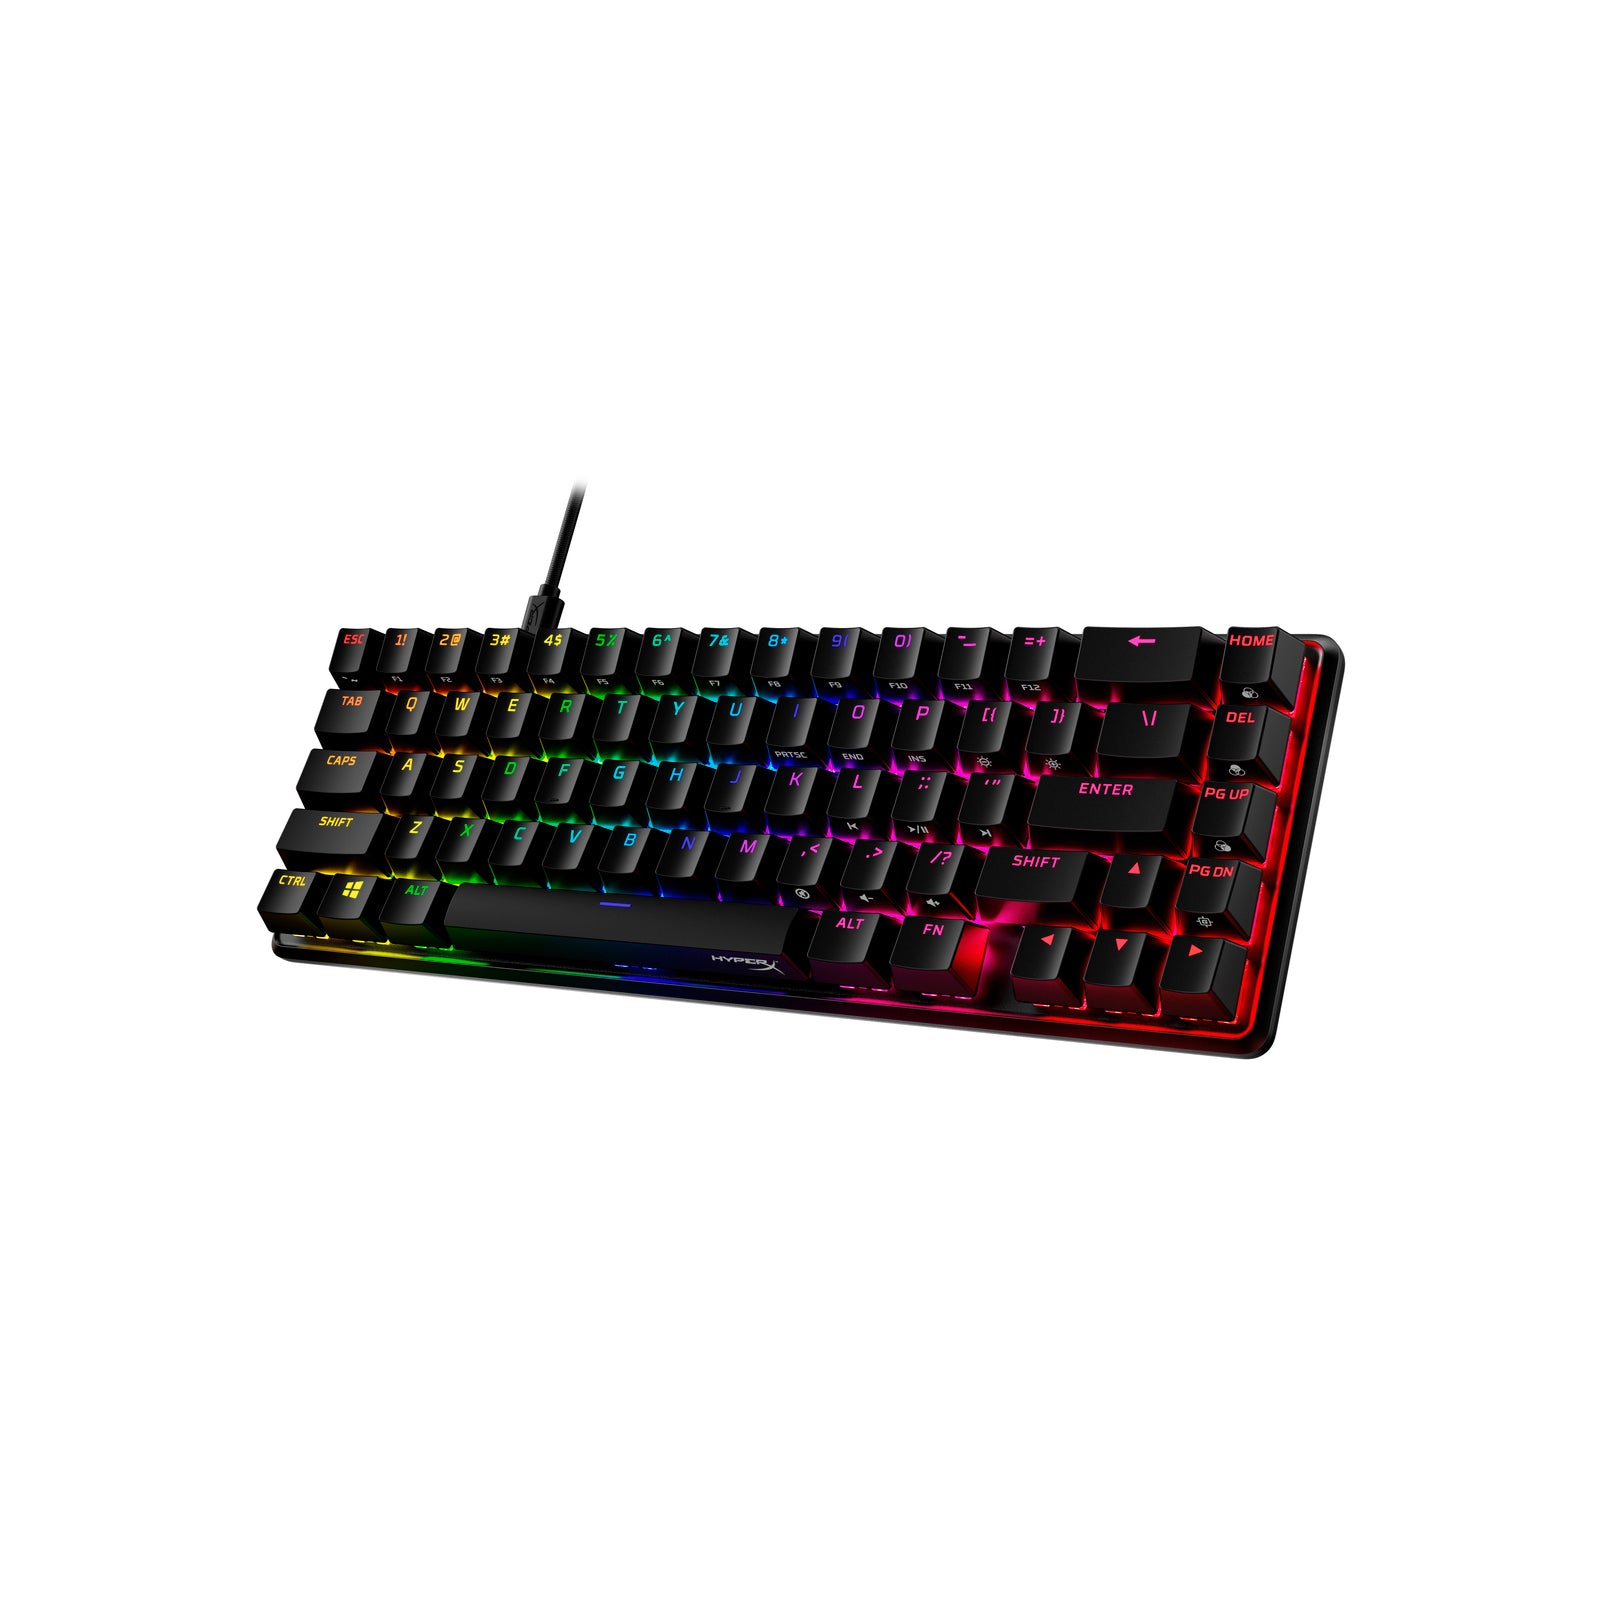 Right front facing view of HyperX Alloy Origins 65 mechanical keyboard displaying RGB lighting